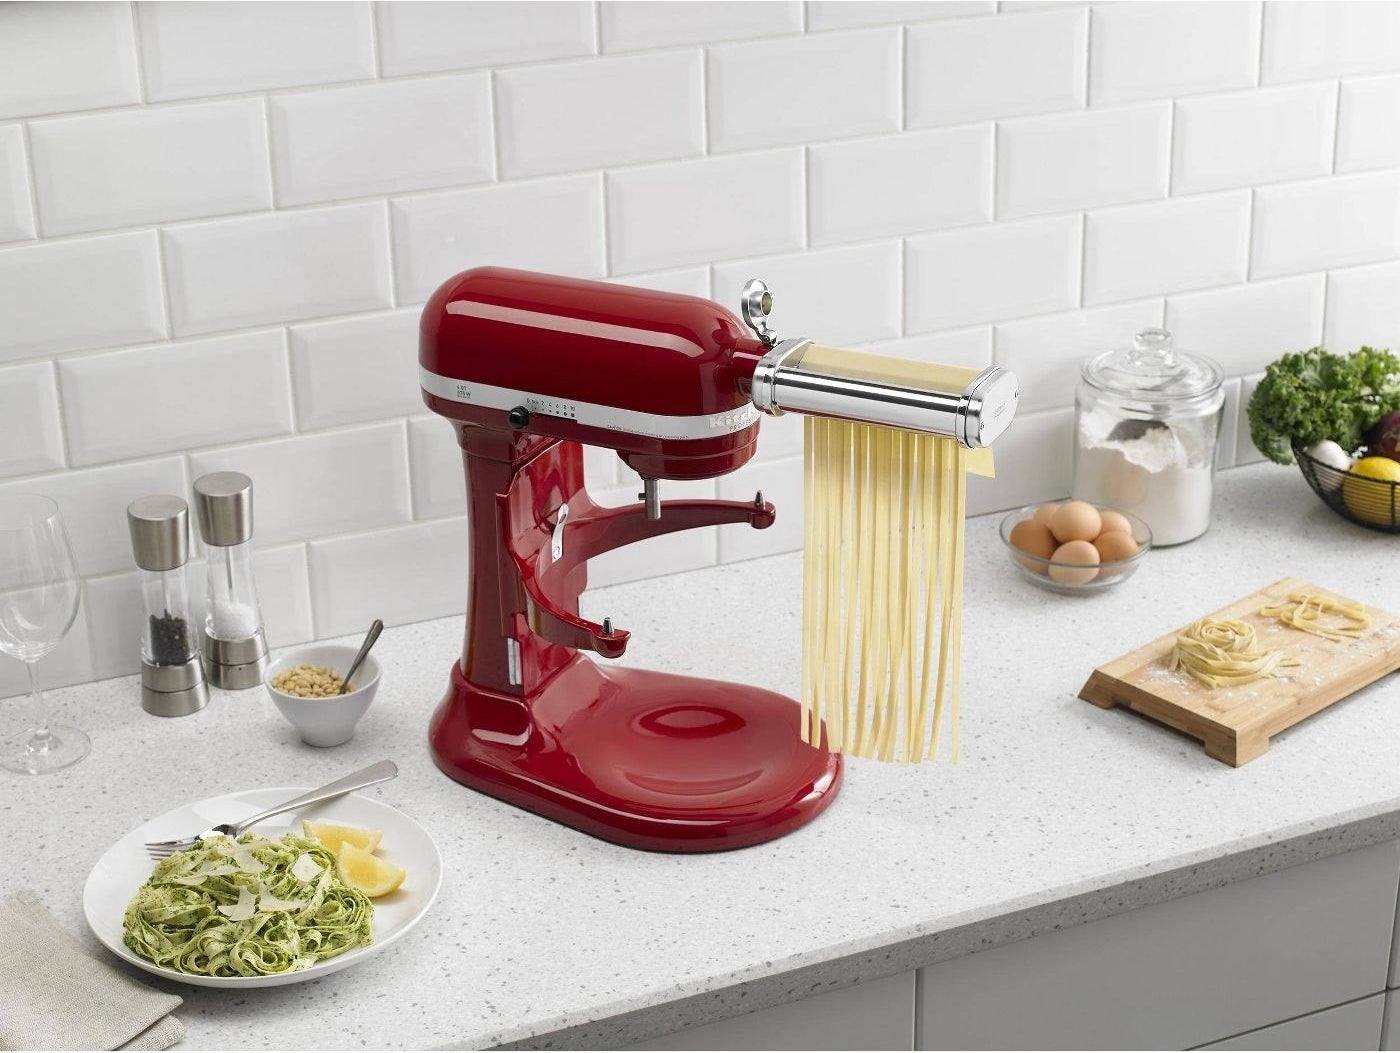 a KitchenAid blender with pasta rolling and cutting attachments staged on a kitchen counter